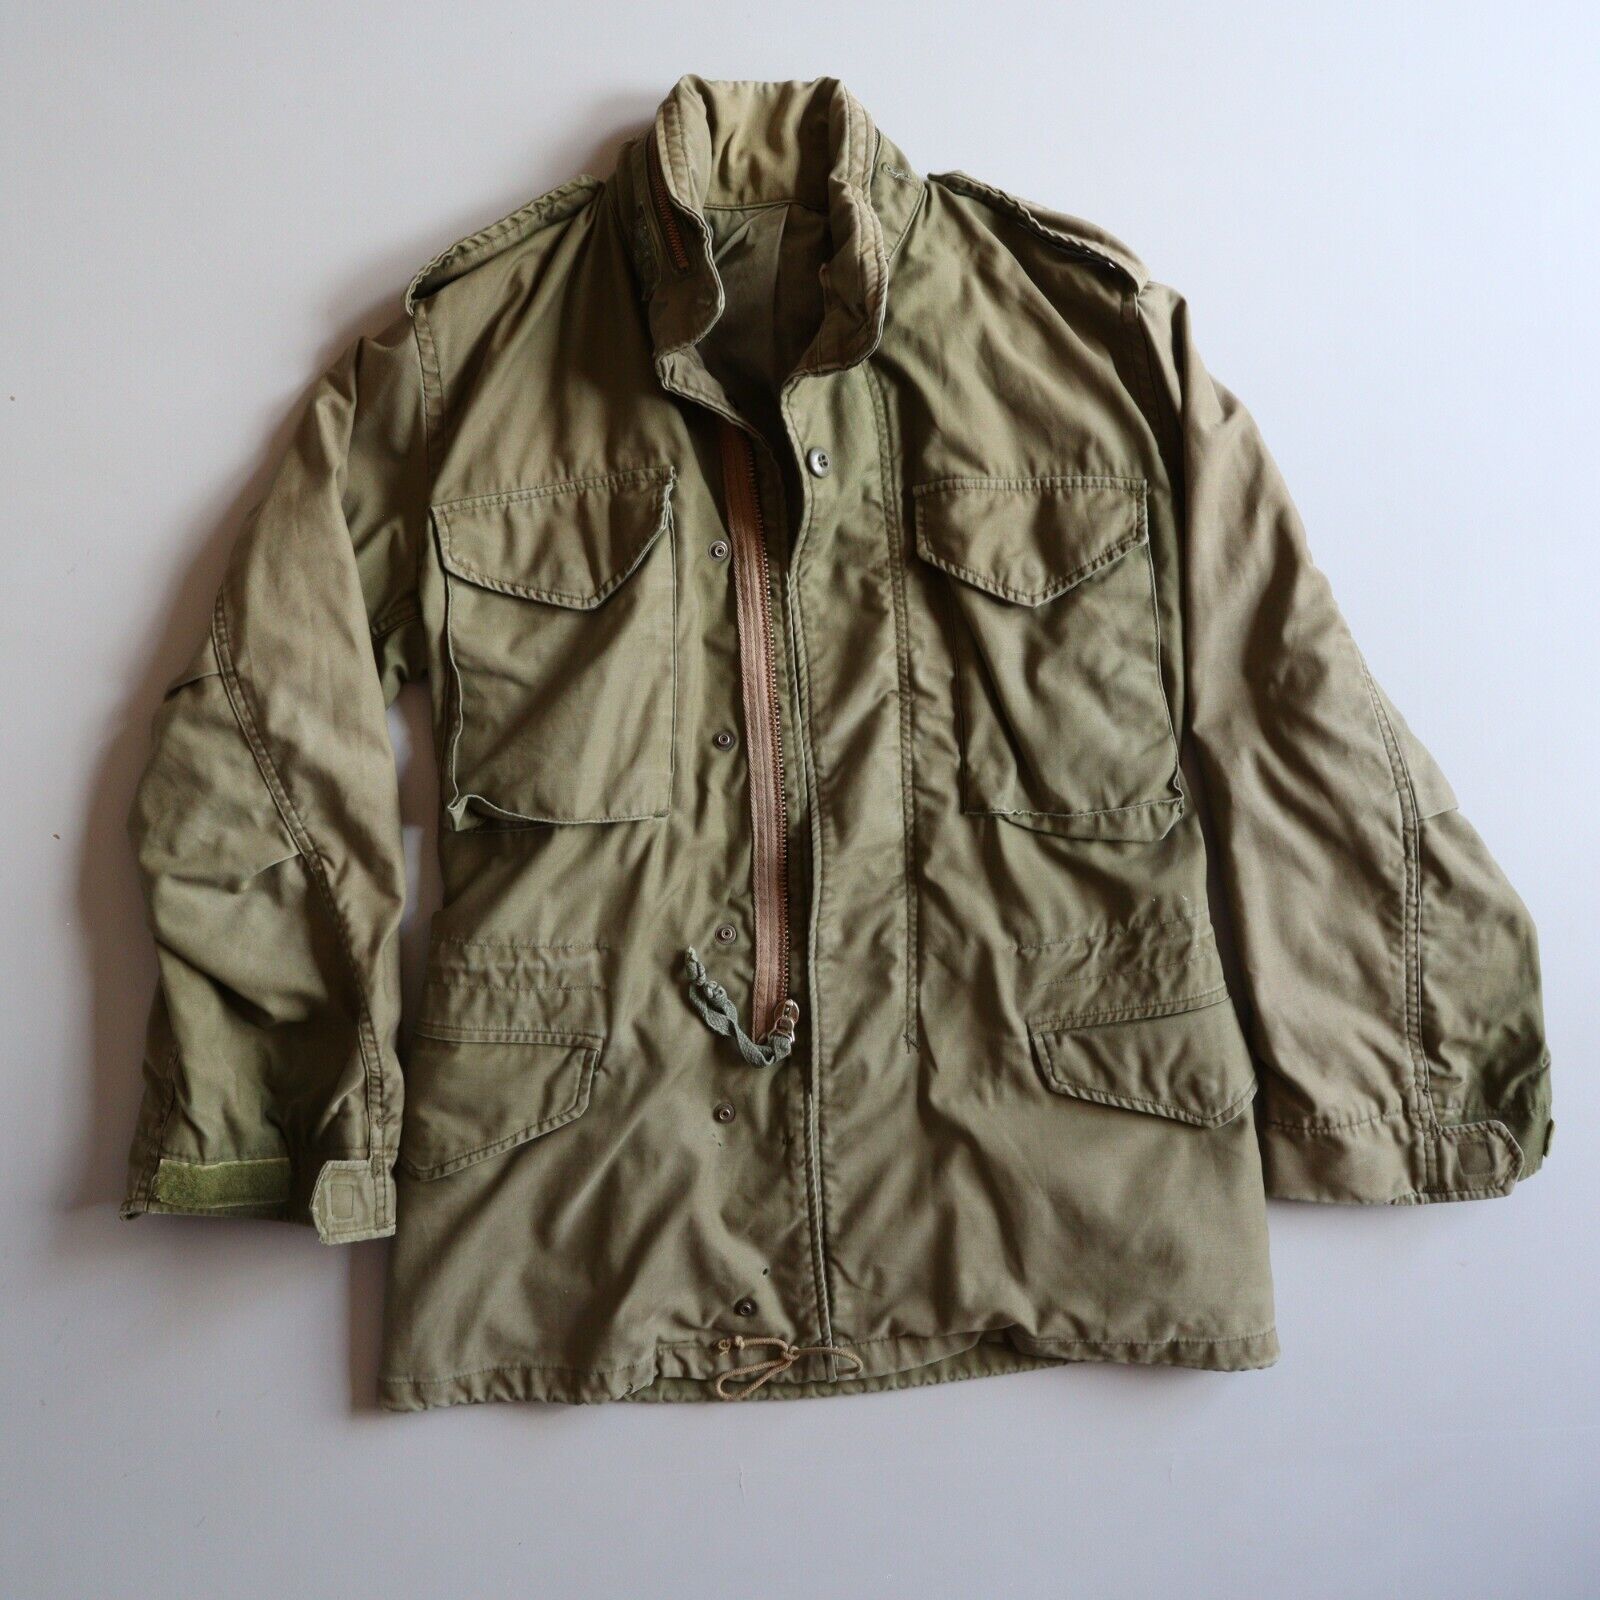 Vintage US Military 80s VTG Army Green Hooded Field Jacket Coat XS